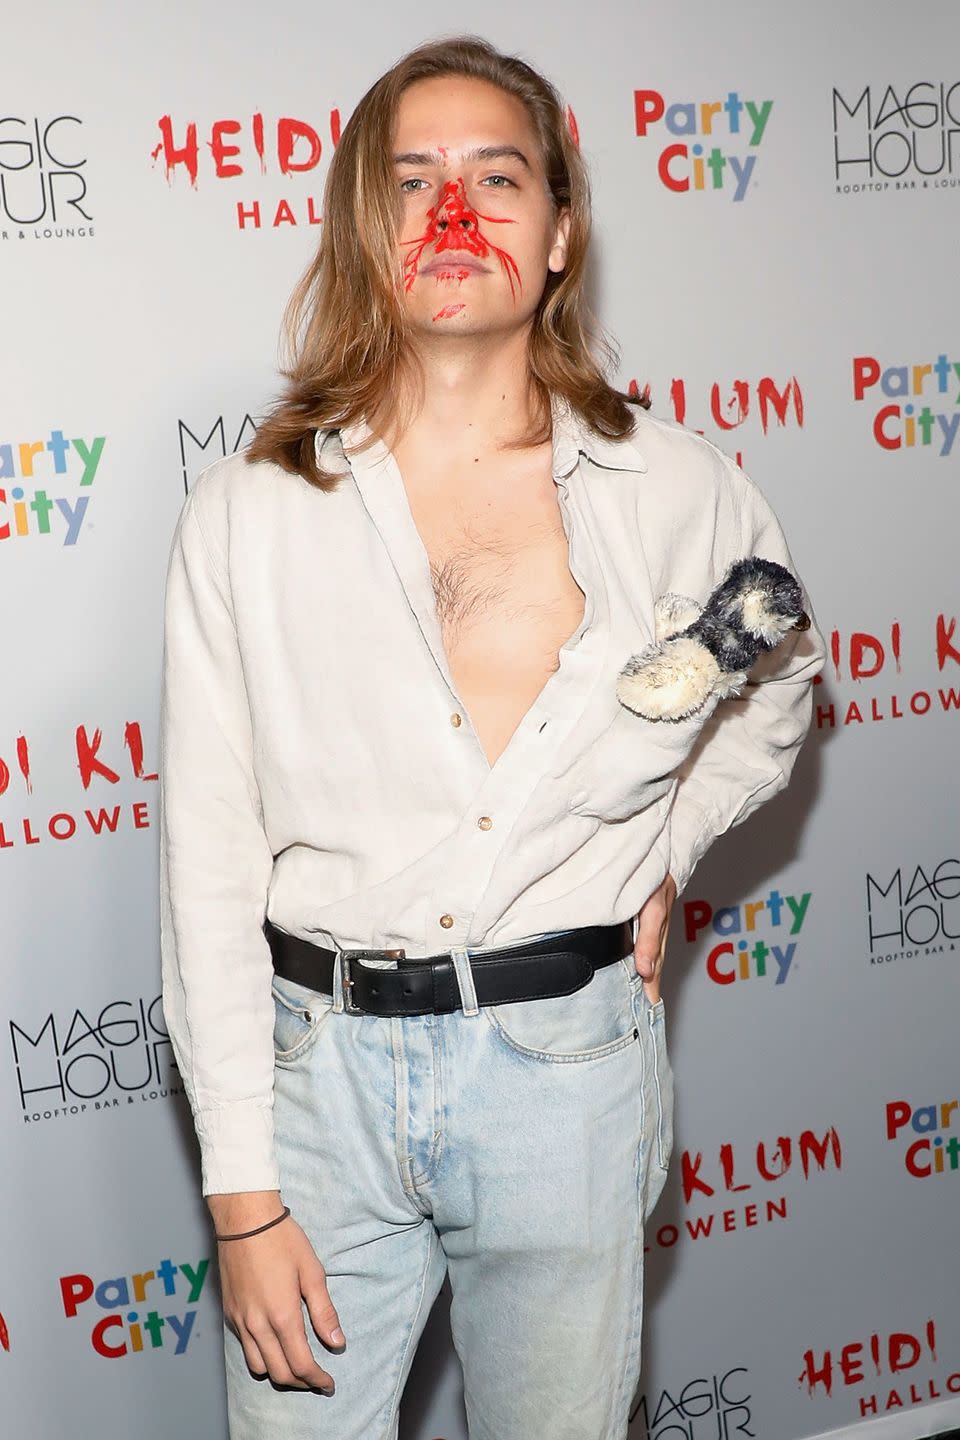 Dylan Sprouse as Fabio